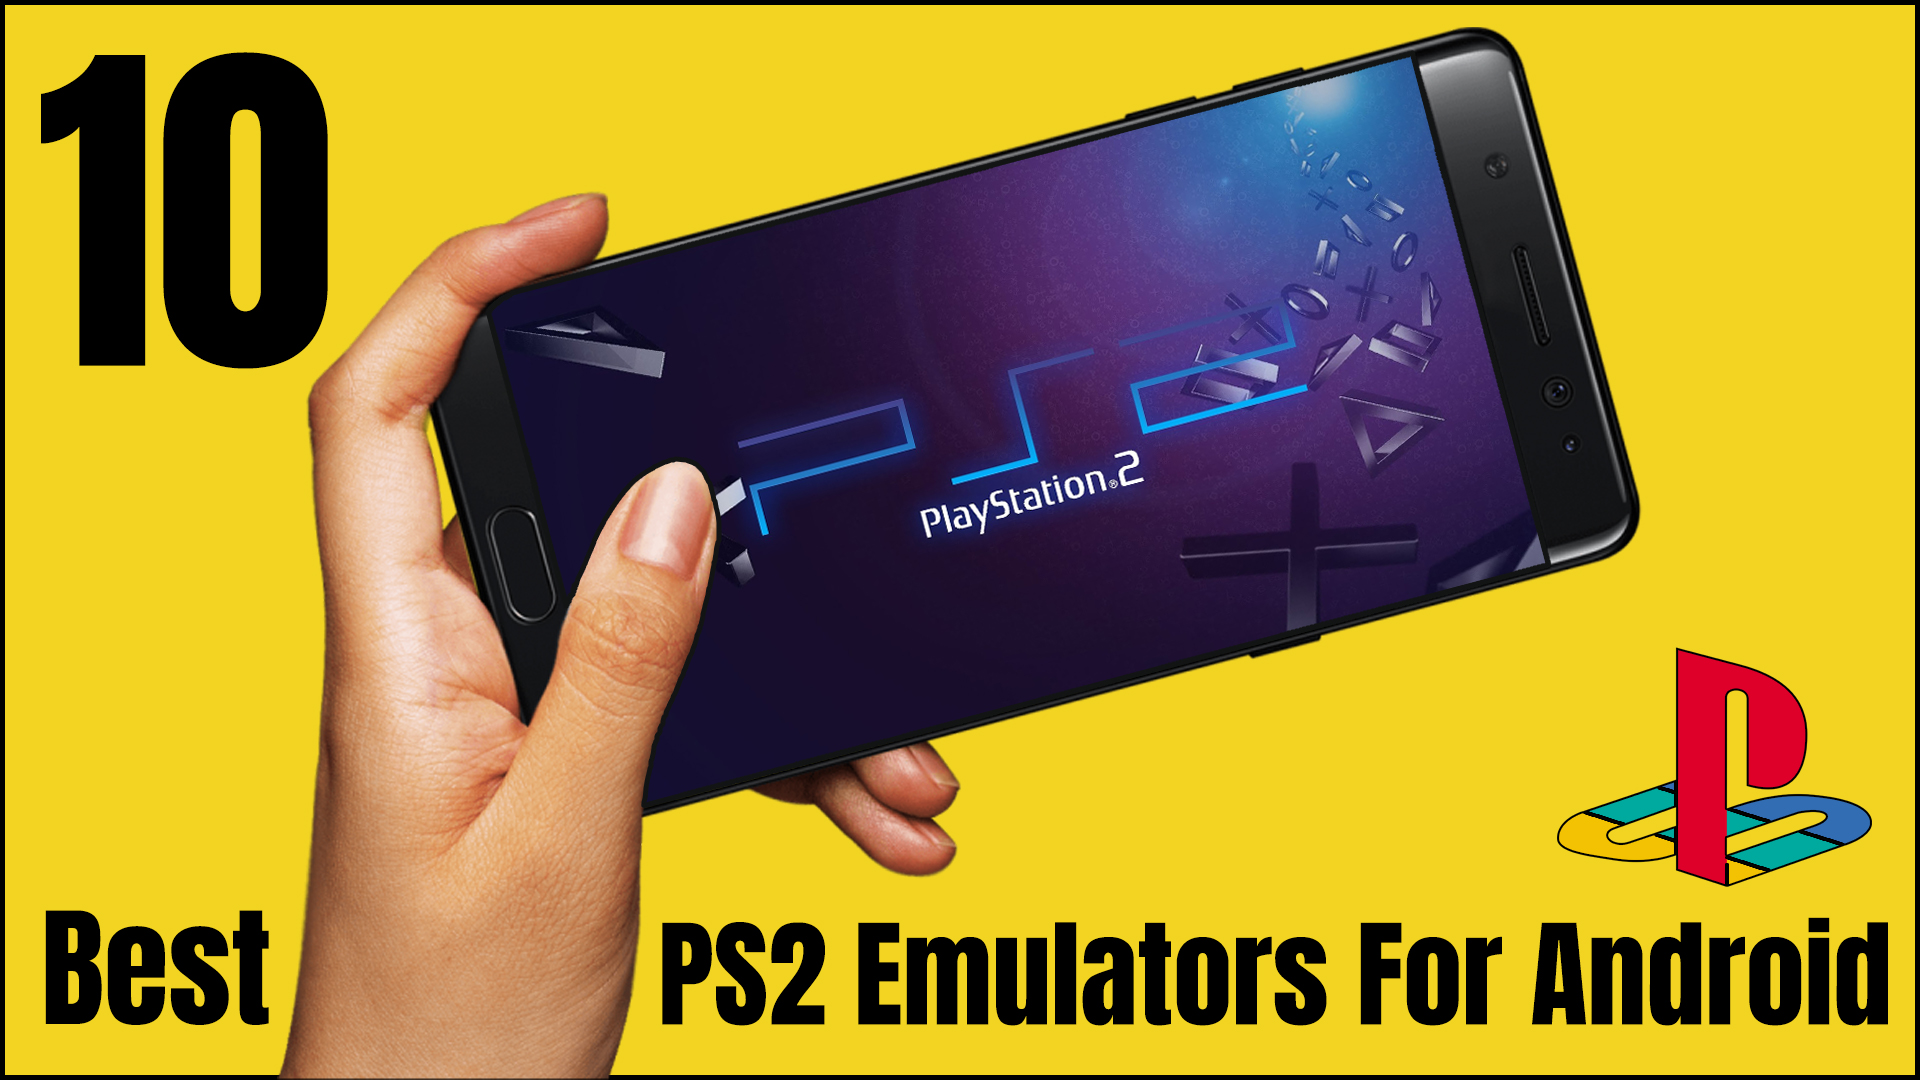 Best PS2 Emulators For Android